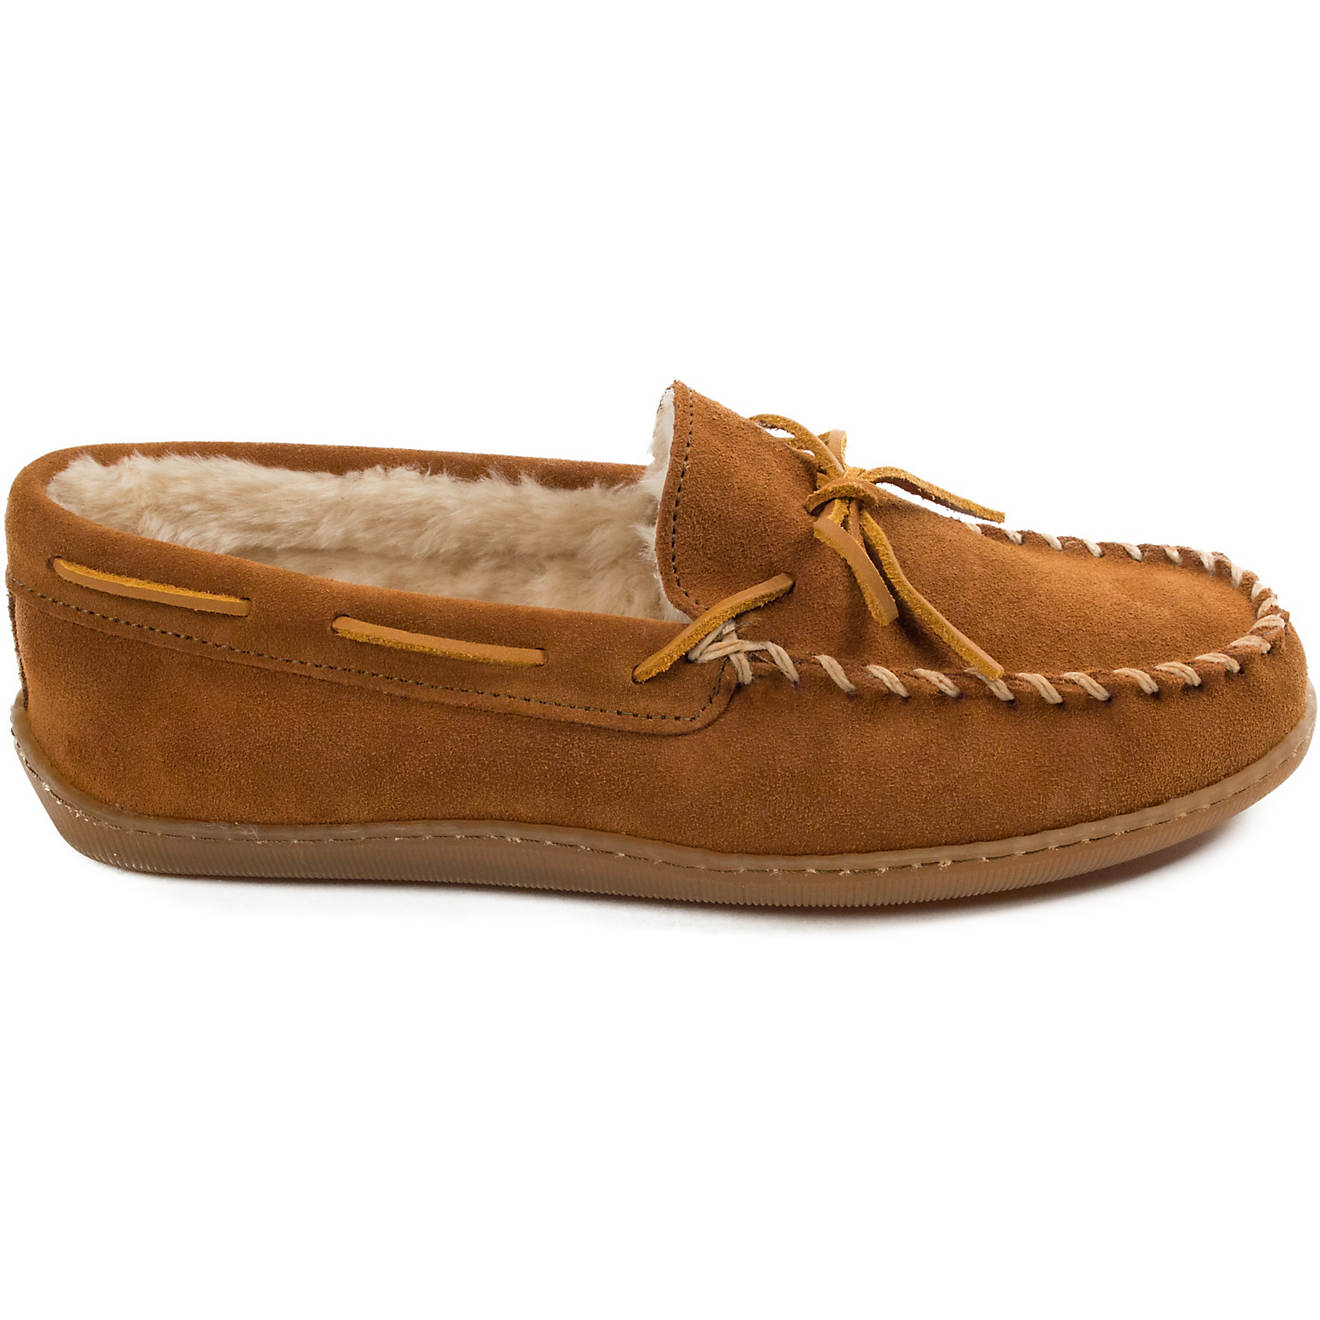 Minnetonka Men's Pile Lined Hardsole Moccasin Slippers                                                                           - view number 1